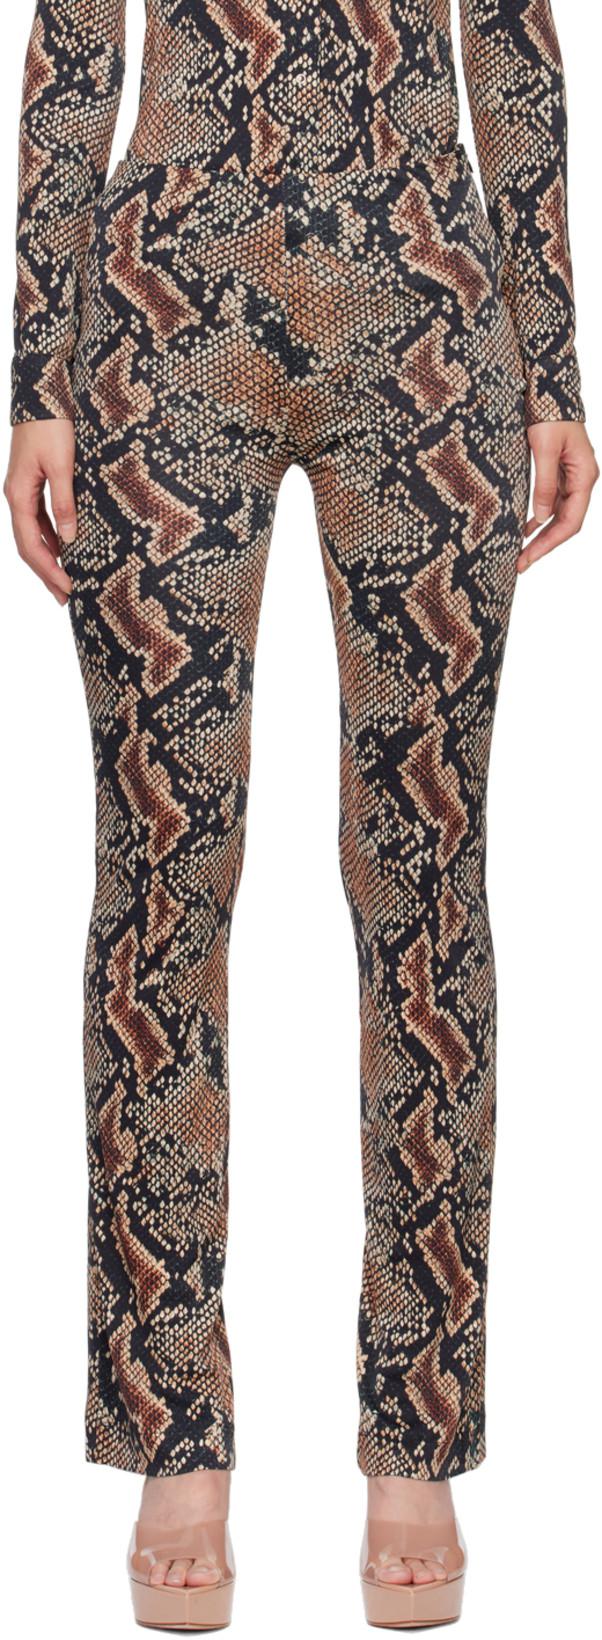 Black Snake Print Trousers by ATLEIN